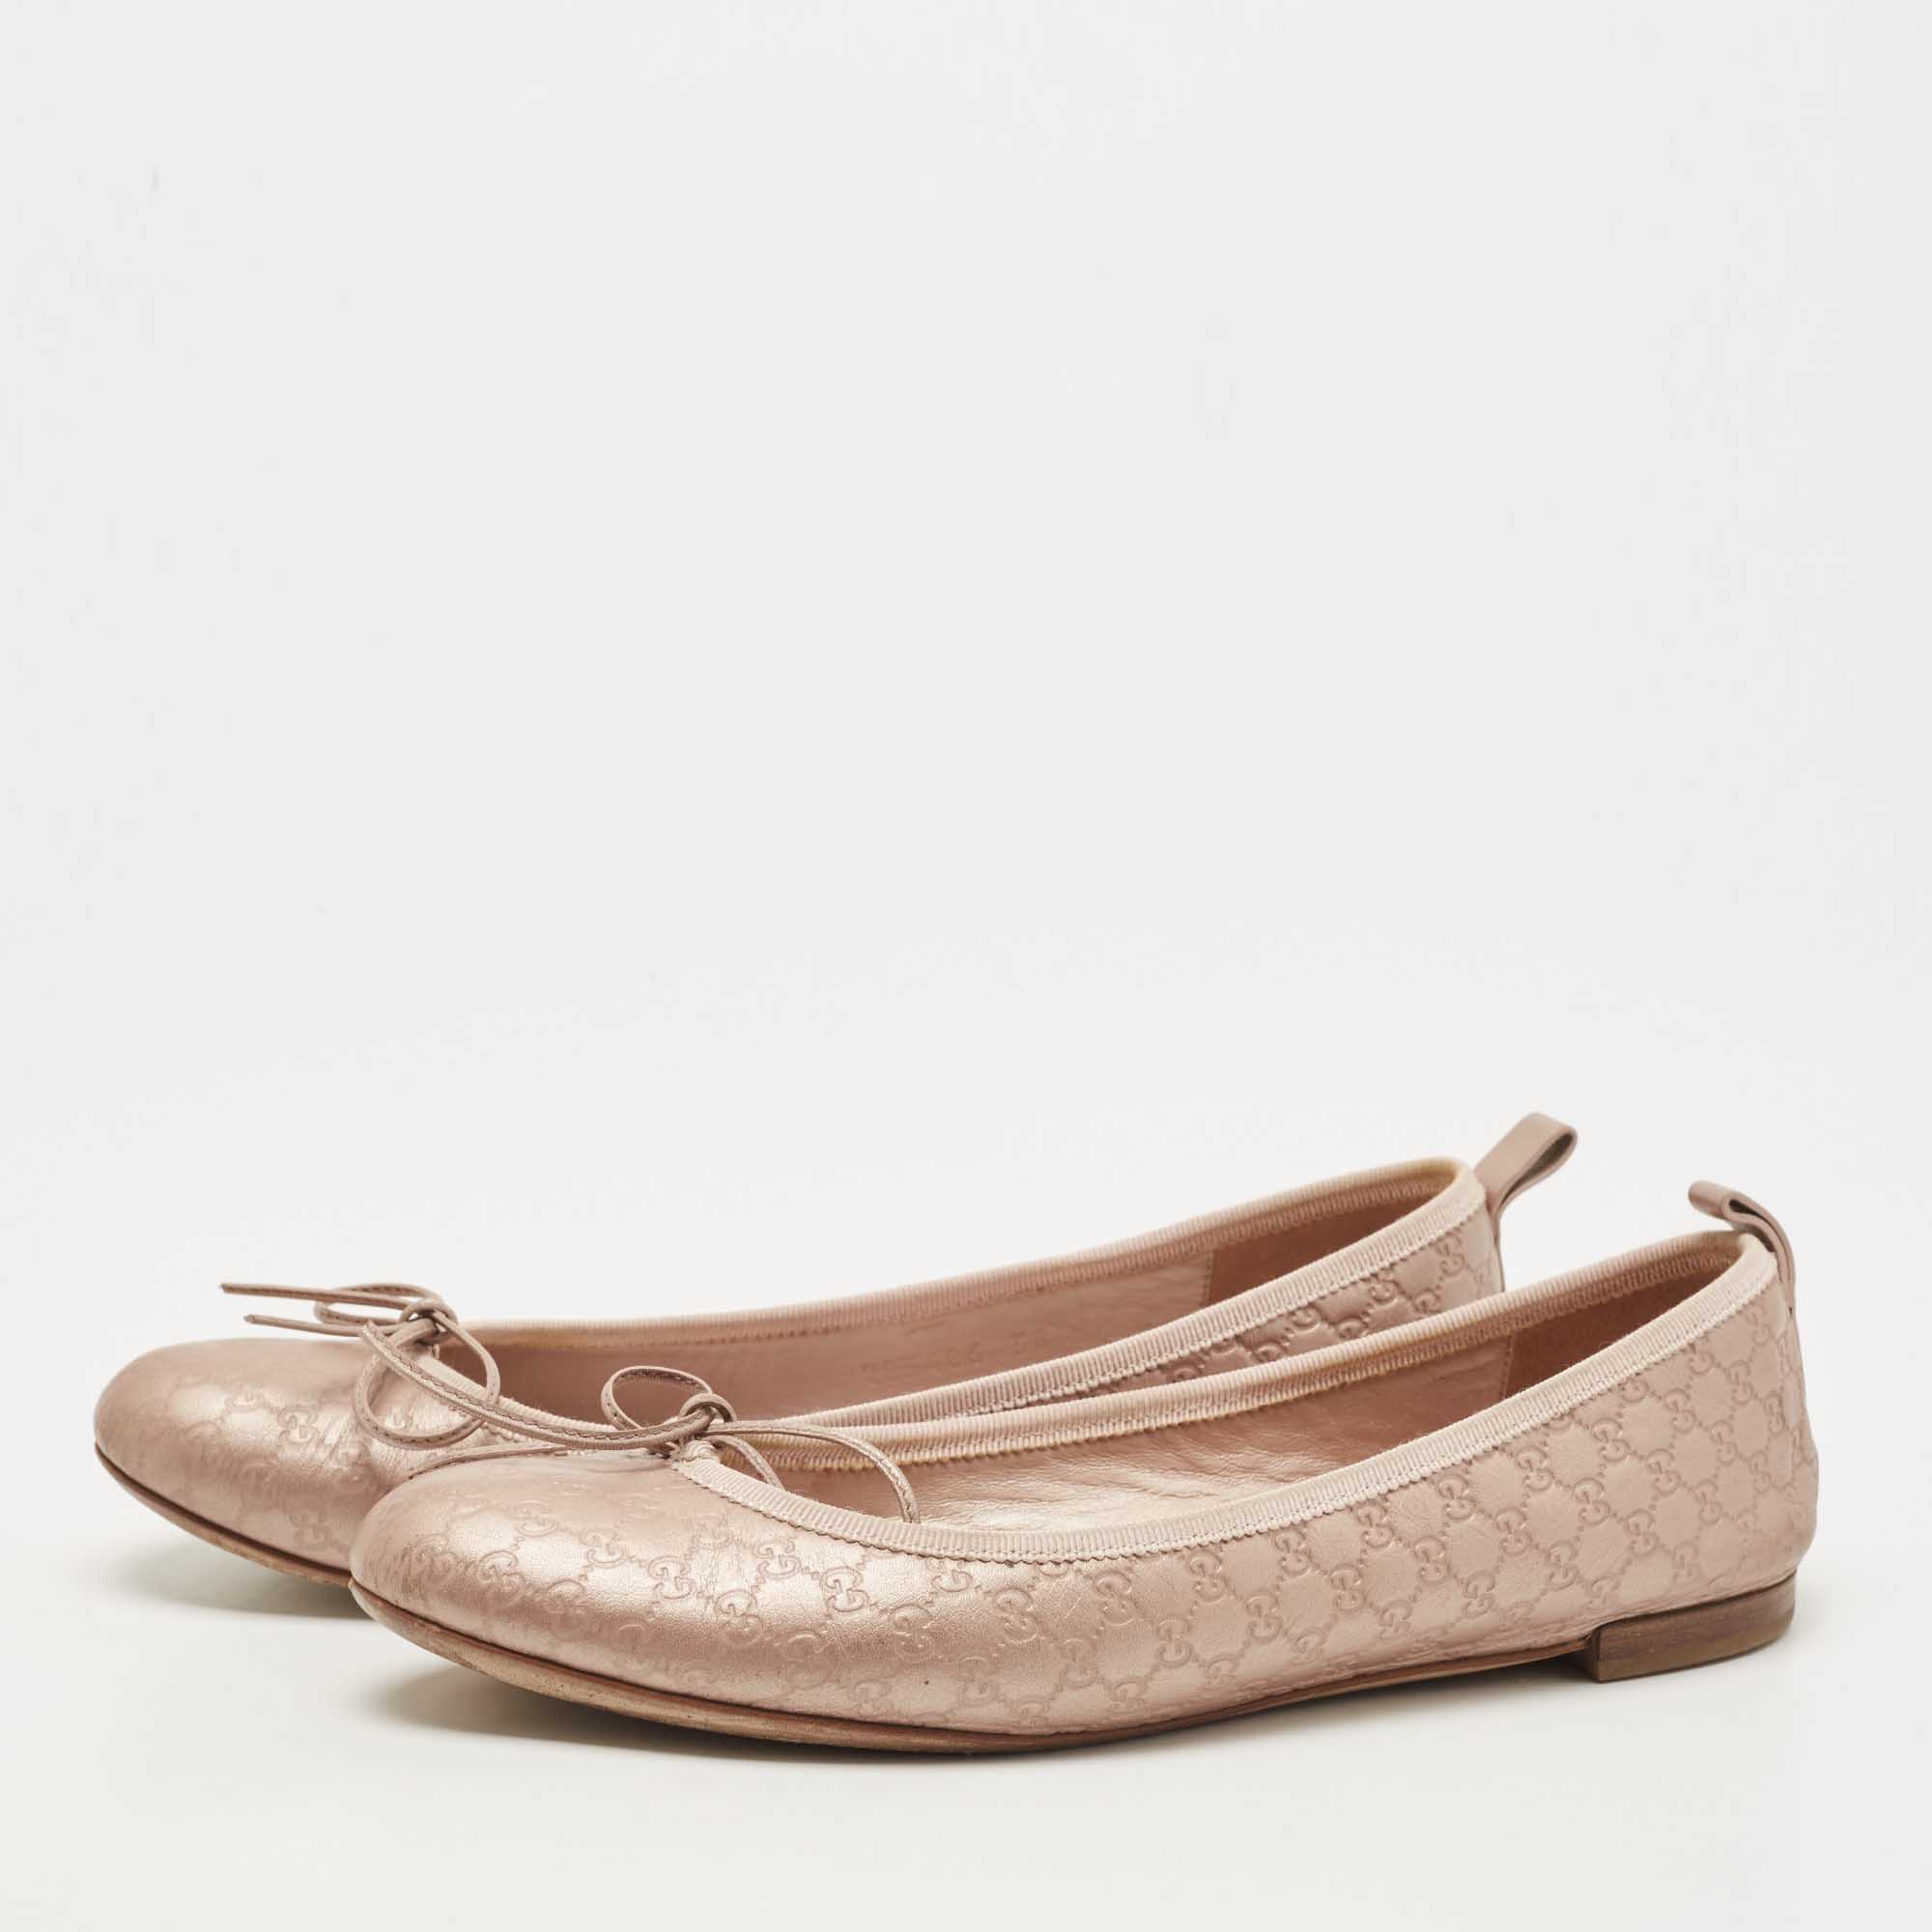 

Gucci Metallic Guccissima Leather Bow Ballet Flats Size